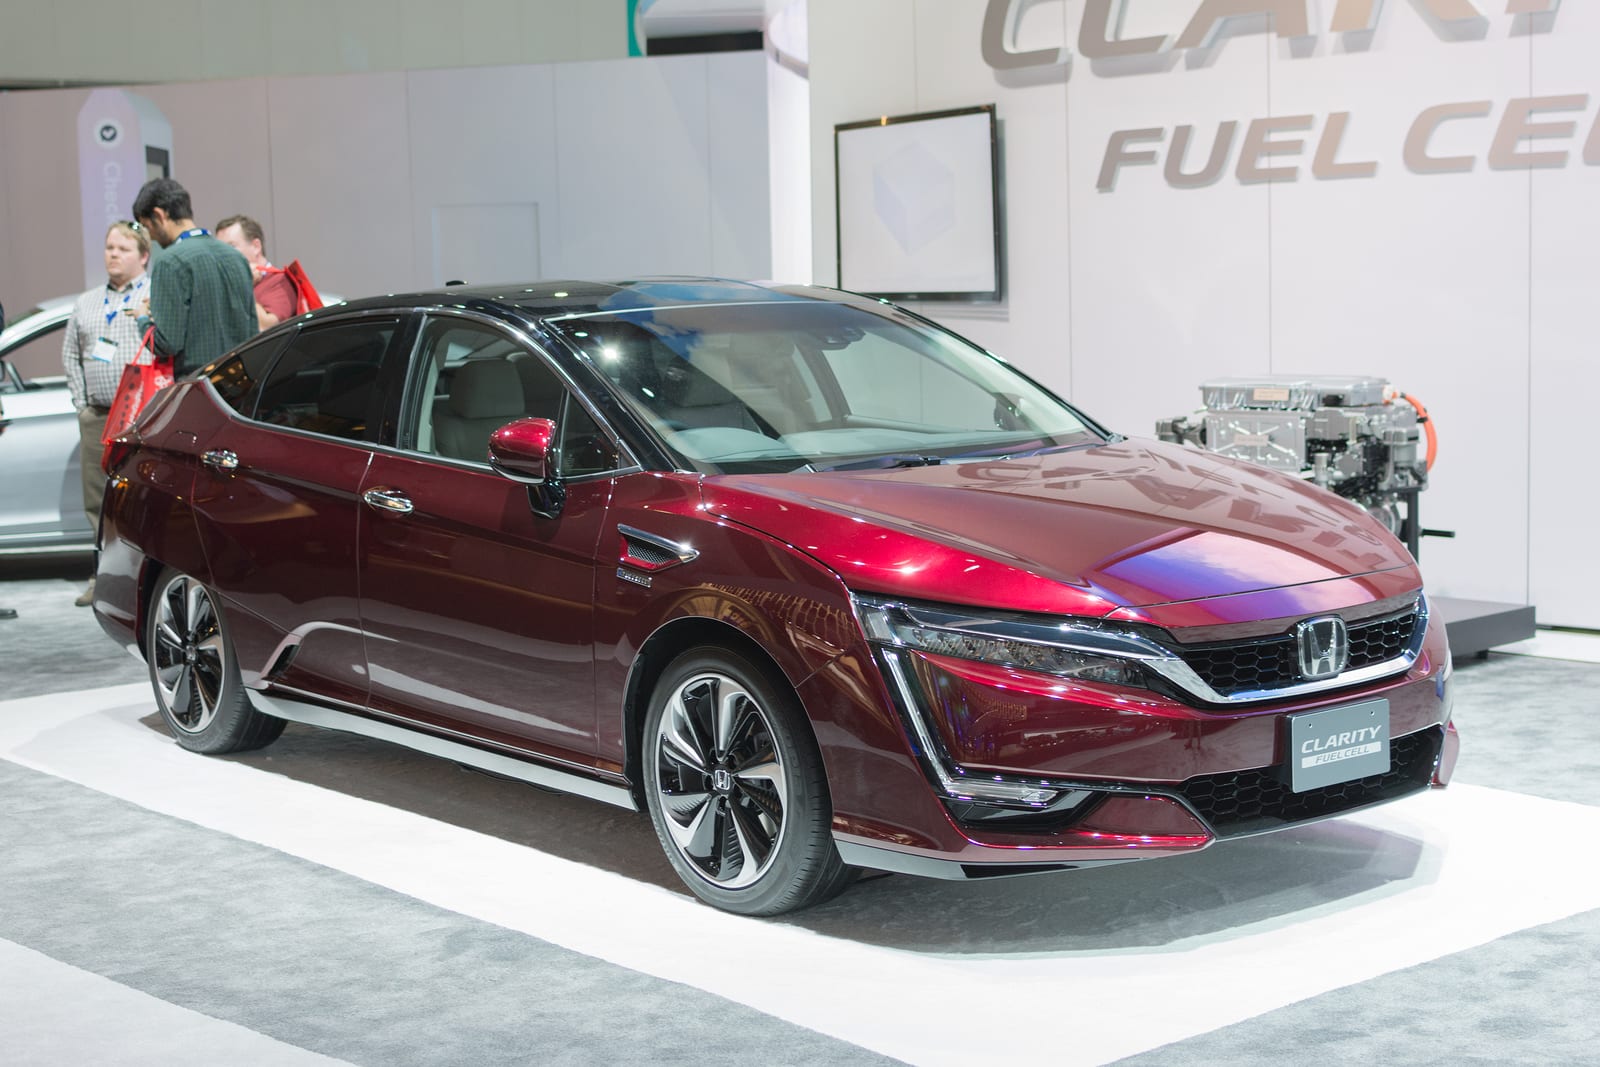 Honda’s Clarity Fuel Cell vehicle comes to California